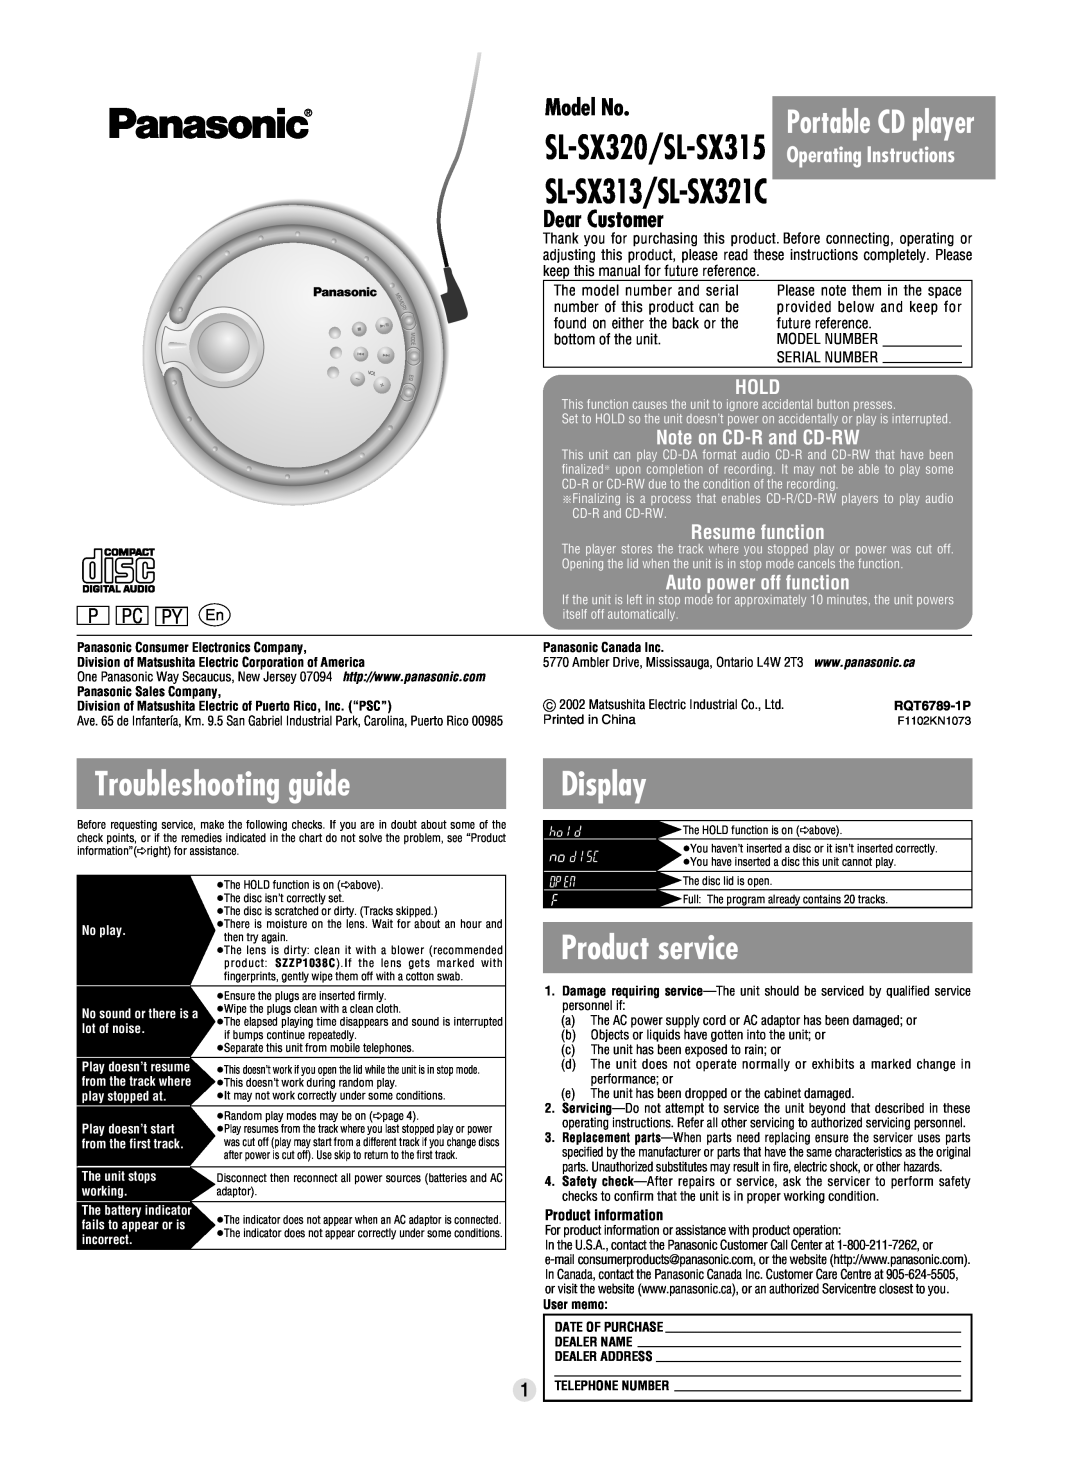 Panasonic SL-SX315 manual Troubleshooting guide, Display, Product service, Hold, Note on CD-Rand CD-RW, Resume function 